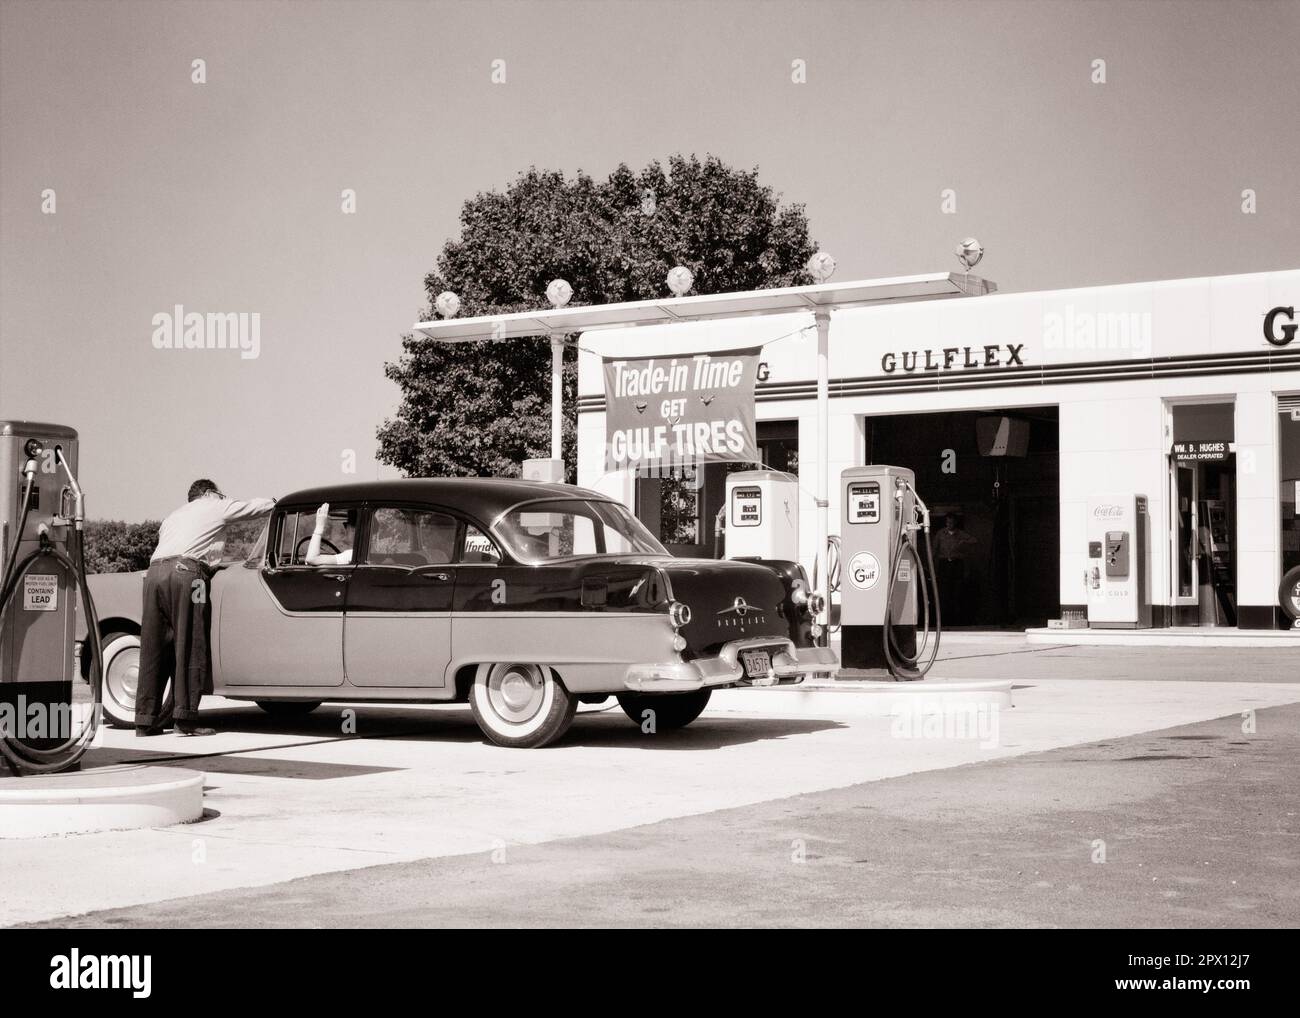 1950s ANONYMOUS MAN GULF GAS STATION ATTENDANT CLEANING WINDSHIELD FOR WOMAN DRIVING 1955 FOUR DOOR PONTIAC SEDAN AUTOMOBILE - m399 HAR001 HARS GULF LIFESTYLE SATISFACTION FEMALES JOBS COPY SPACE HALF-LENGTH LADIES PERSONS AUTOMOBILE MALES FUEL TRANSPORTATION B&W PUMPS SKILL OCCUPATION SKILLS GAS STATION CUSTOMER SERVICE SEDAN AUTOS SERVICE STATION LABOR EMPLOYMENT OCCUPATIONS GASOLINE CONCEPTUAL PONTIAC AUTOMOBILES VEHICLES WINDSHIELD EMPLOYEE ATTENDANT COOPERATION PETROL PETROLEUM TIRES 1955 BLACK AND WHITE CAUCASIAN ETHNICITY HAR001 LABORING OLD FASHIONED Stock Photo